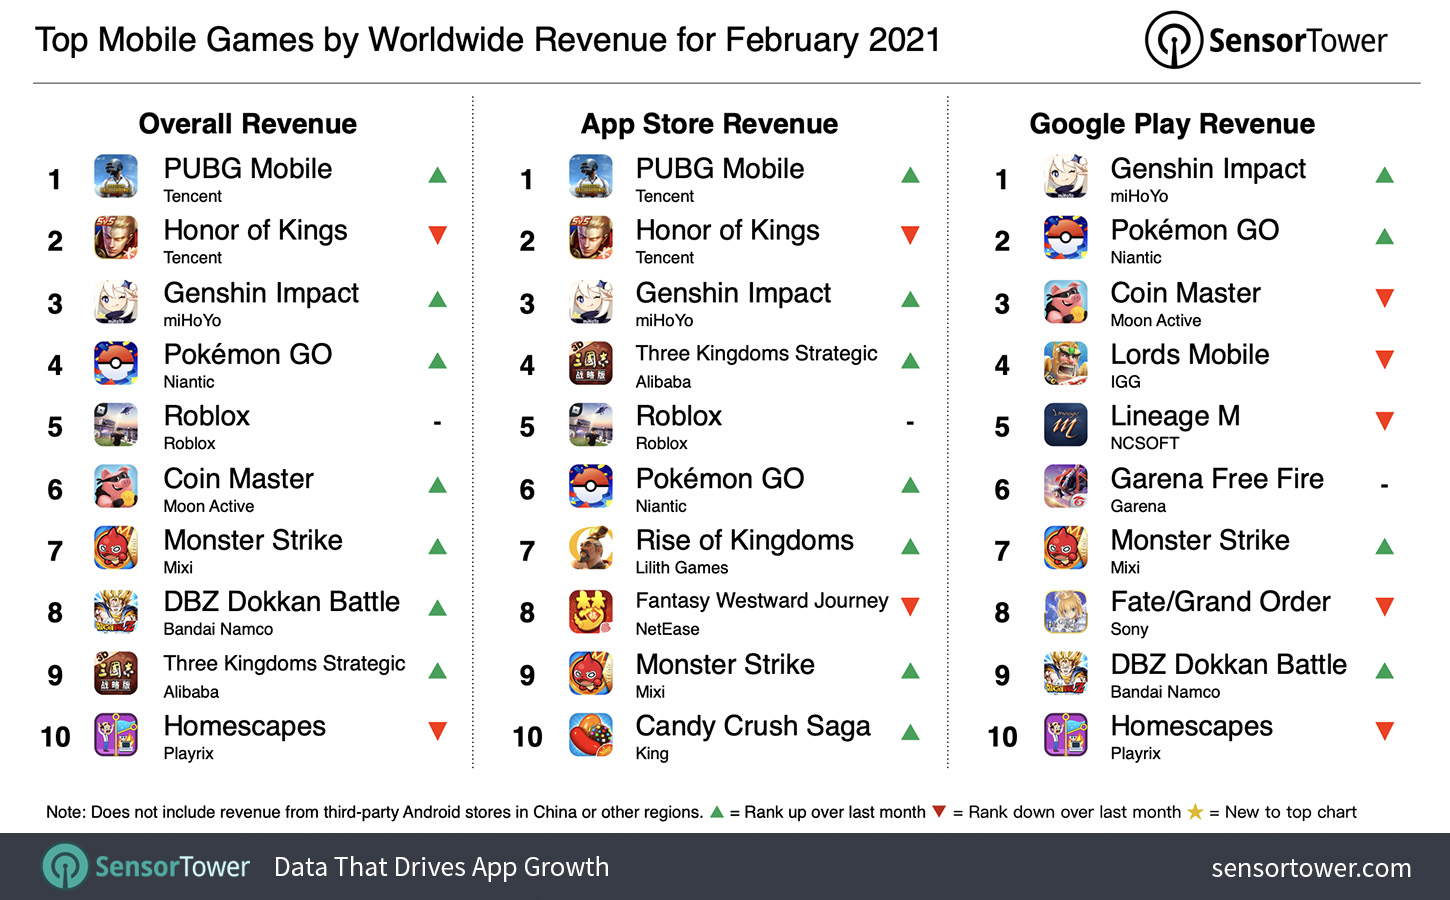 “Top Grossing Mobile Games Worldwide for February 2021